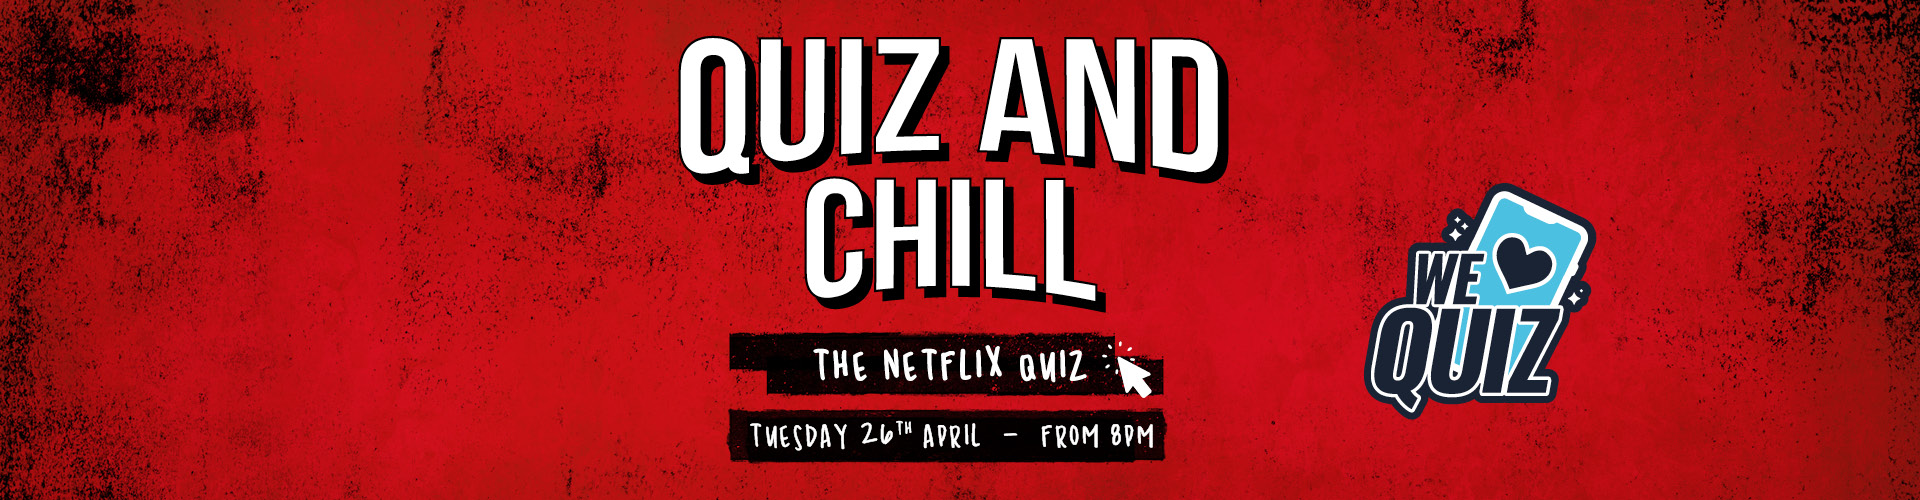 The Netflix Quiz, Tuesday 26th April from 8pm